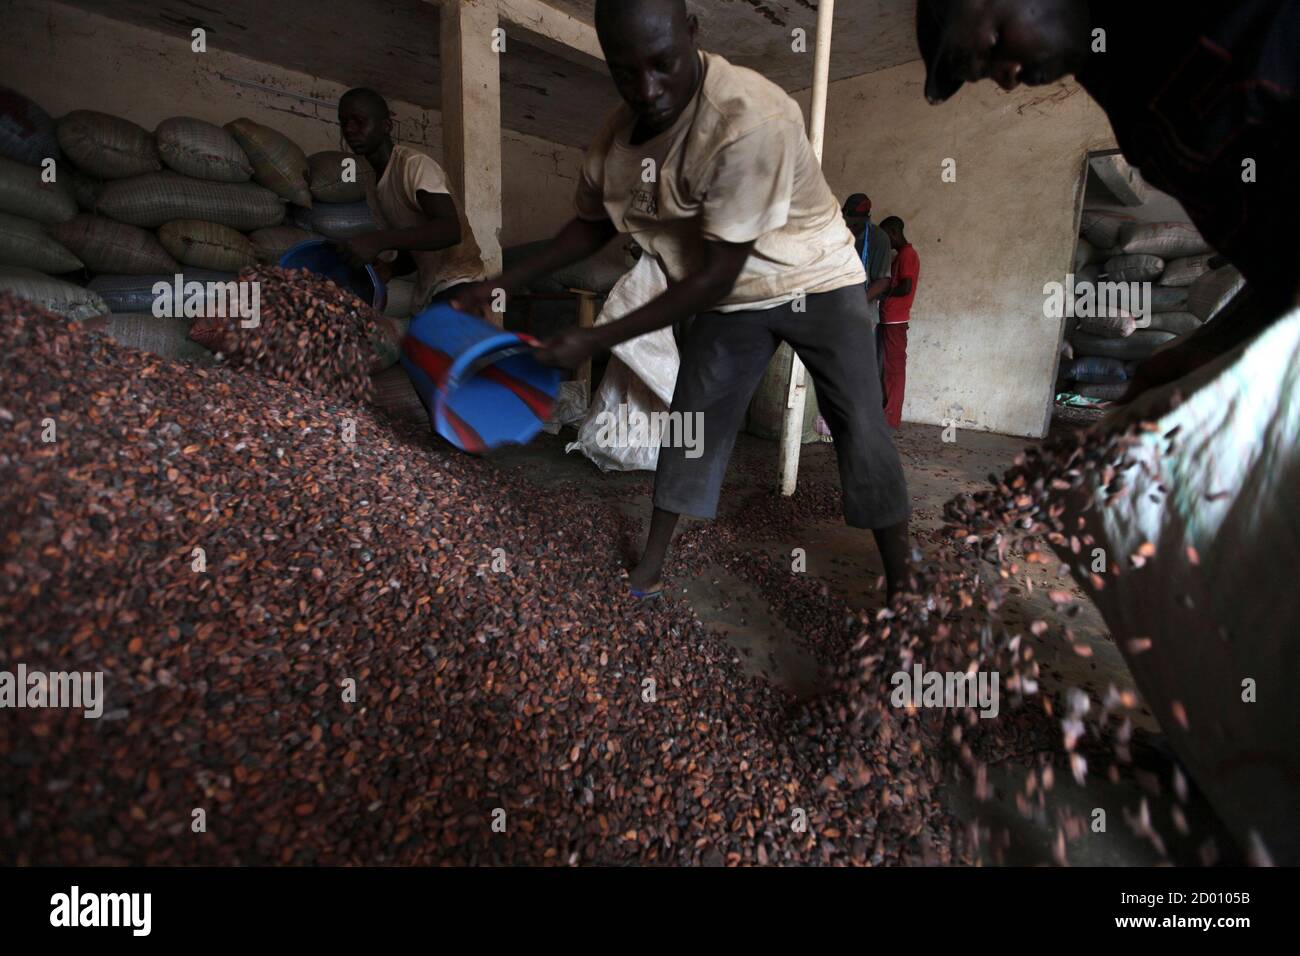 Worker fill a sack with cocoa beans in Duekoue May 18, 2011. Ivory Coast's cocoa industry, which feeds some 40 percent of global demand, was badly hit by the country's internal strife, which only eased when forces loyal to Alassane Ouattara, rival to former president Laurent Gbagbo, captured Gbagbo from his home last month, with the help of the French military. EU and U.S. sanctions on Gbagbo and his aides, plus a call for a cocoa ban by Ouattara, effectively shut down exports for three months. The banking system collapsed, leaving cocoa traders with no cash to pay farmers. To match feature IV Stock Photo